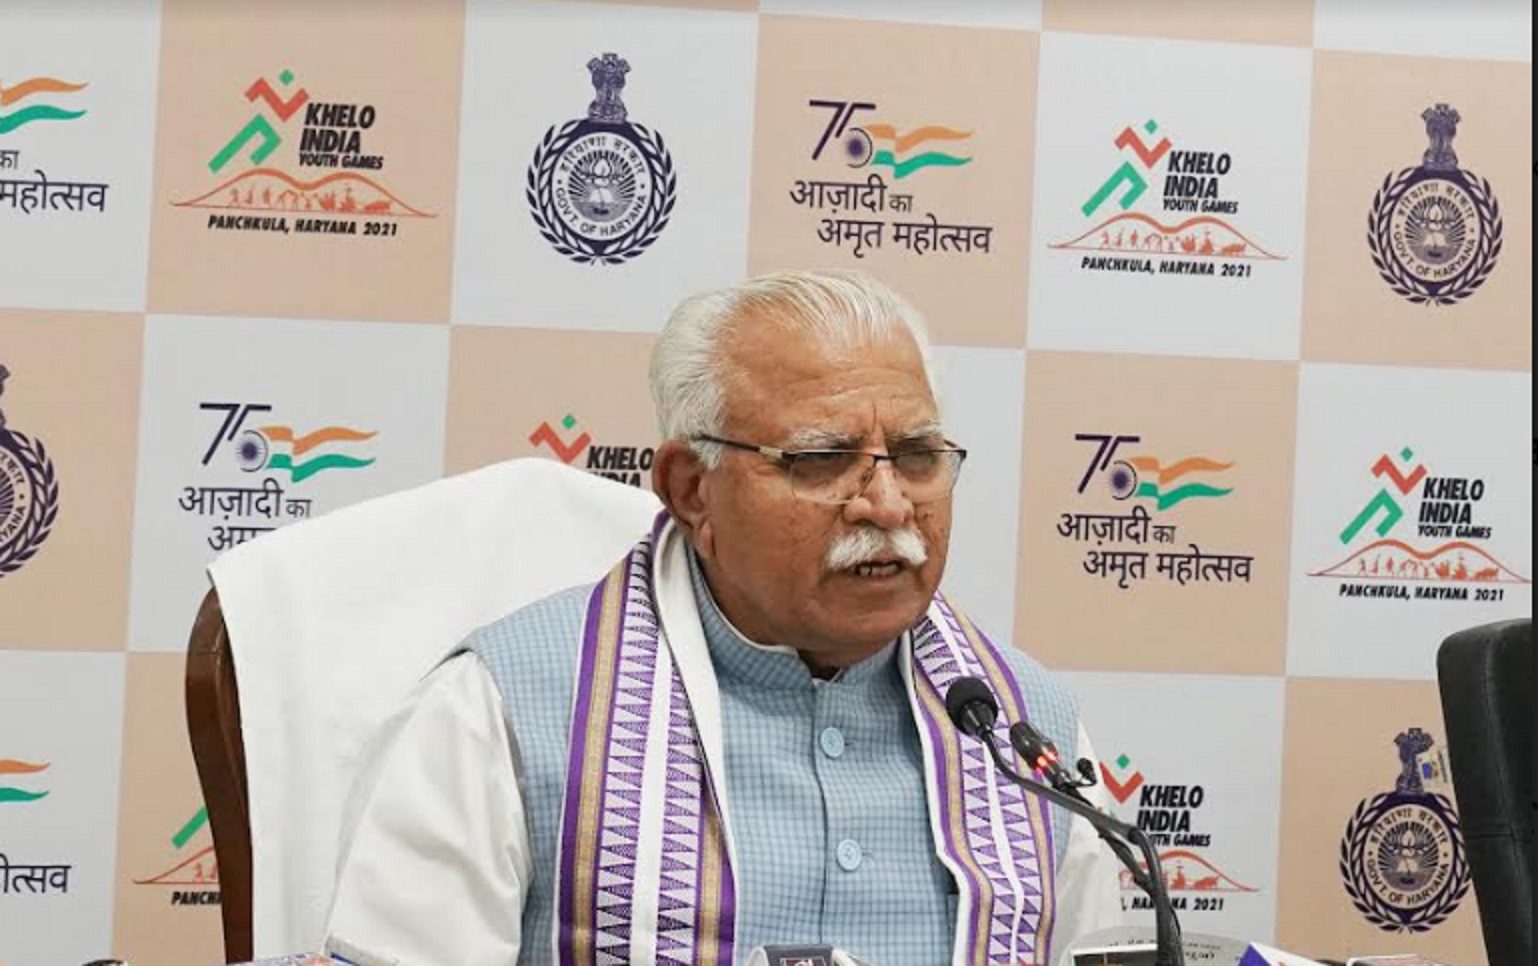 Government aims to provide international level facilities to the players of Haryana: Manohar Lal